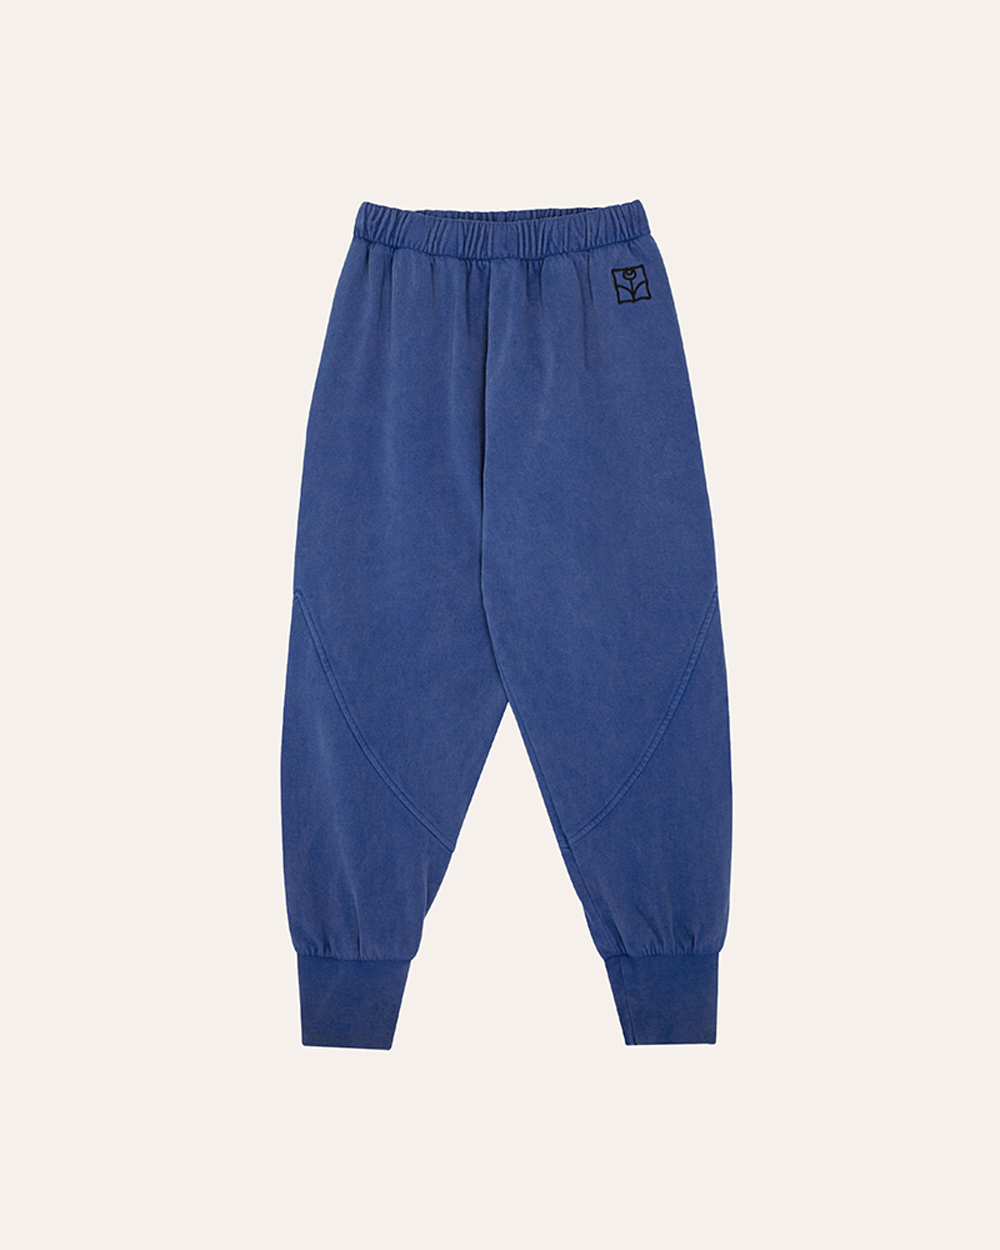 [ THE CAMPAMENTO ] WASHED BLUE KIDS JOGGING TROUSERS [5-6y]